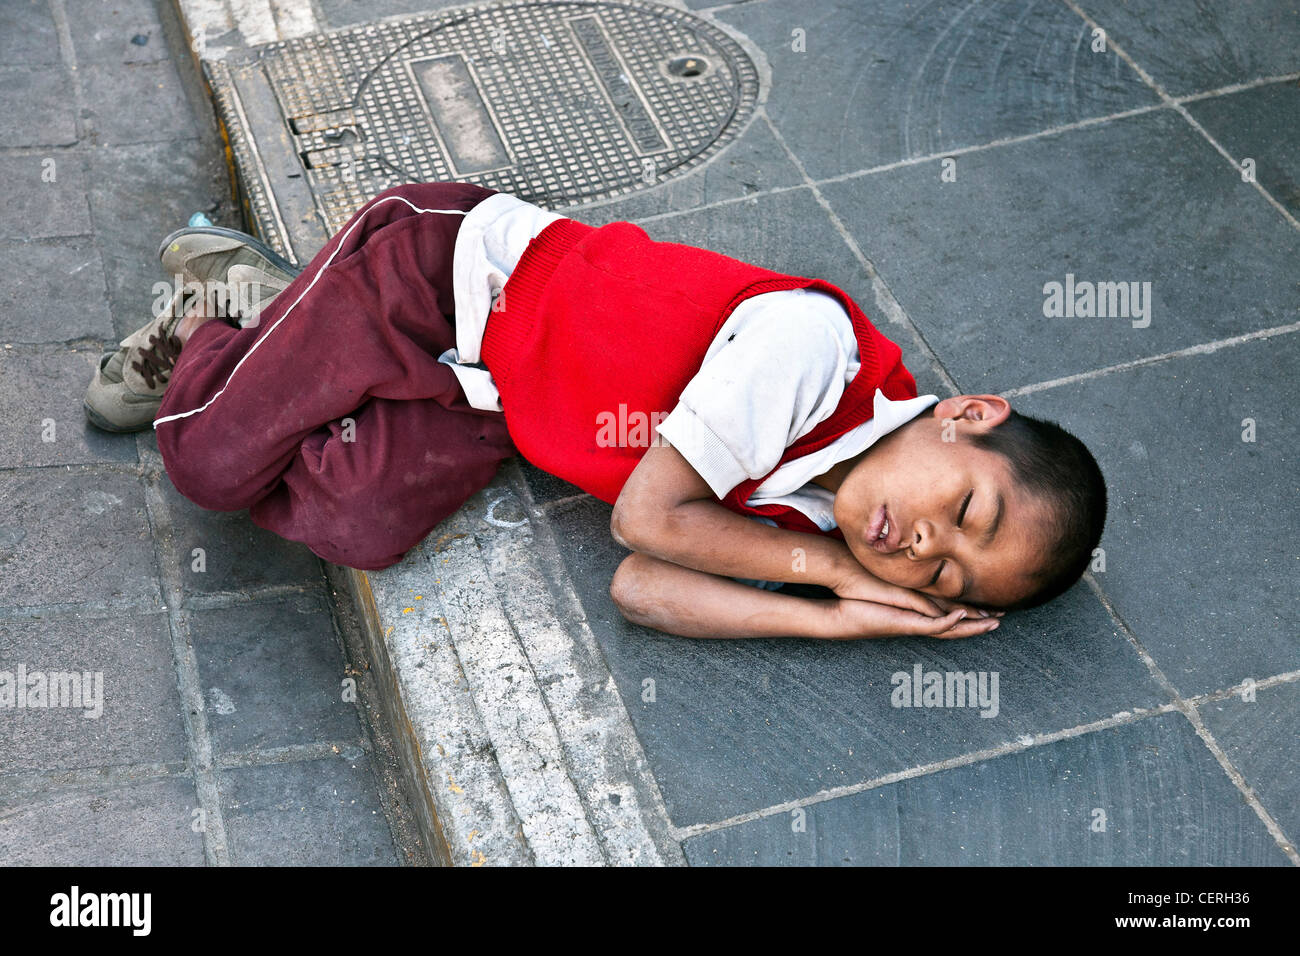 tired young Mexican schoolboy in red school sweater fast asleep on paving stones Oaxaca Zocalo Mexico Stock Photo